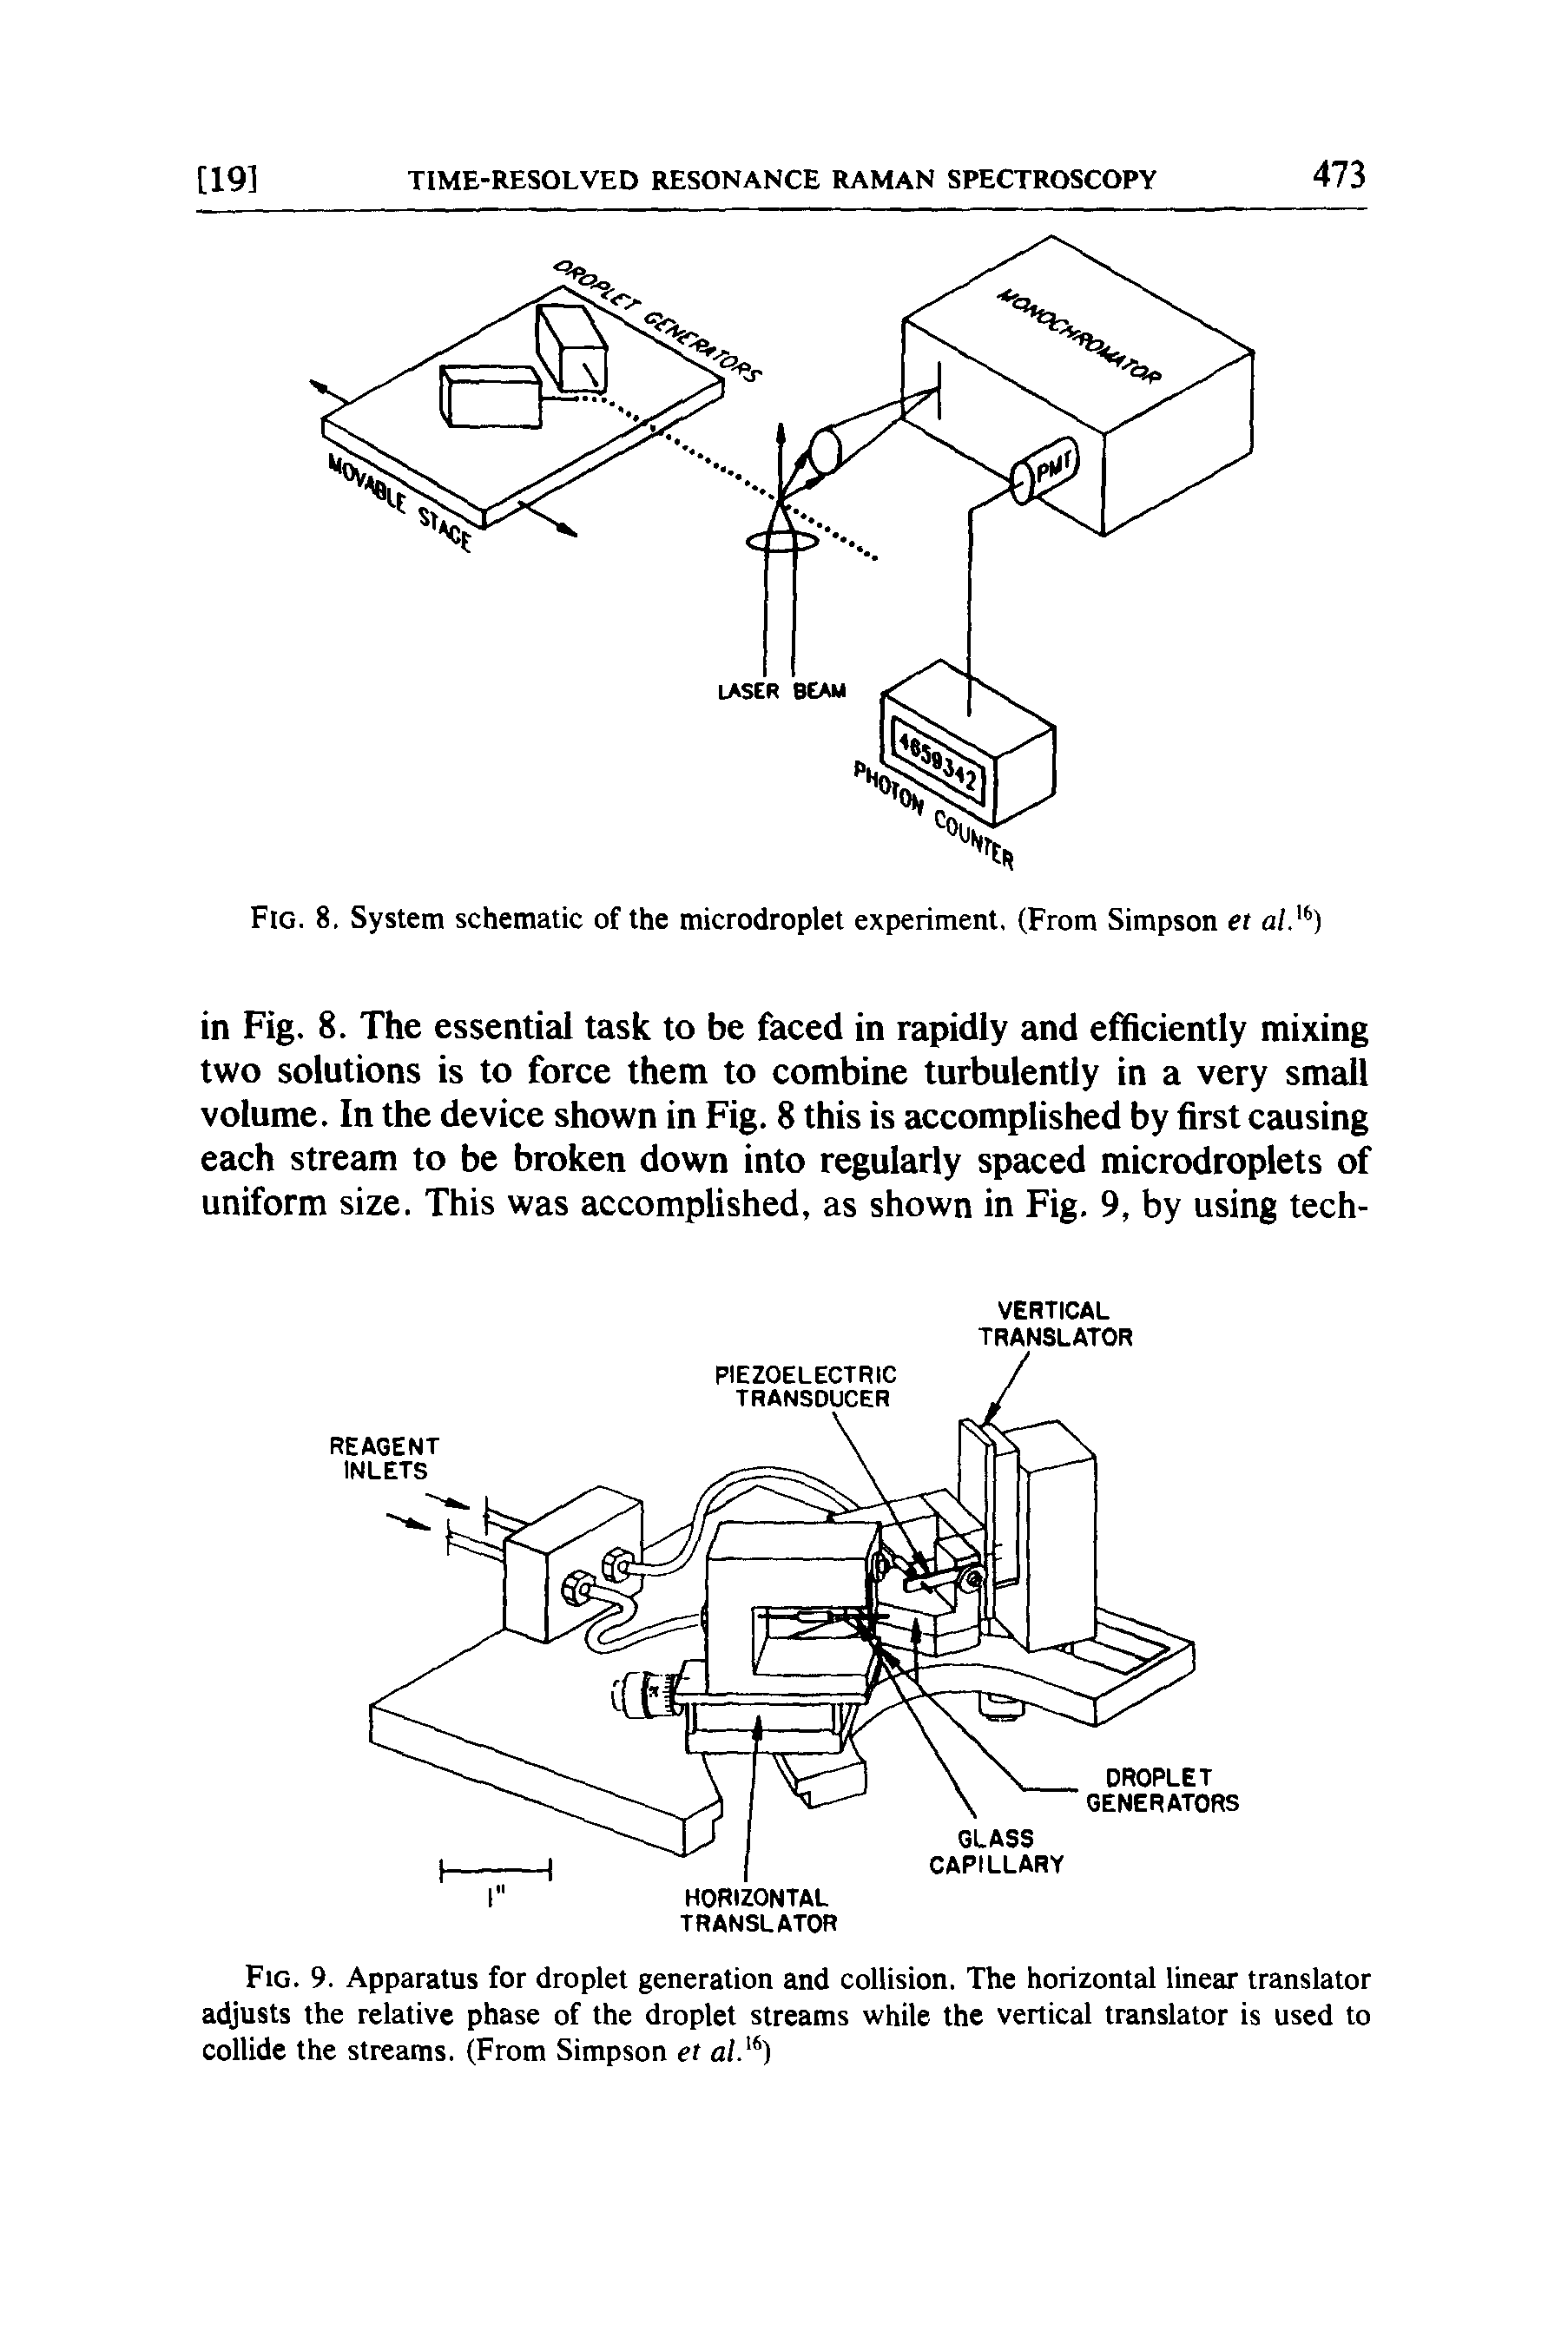 Fig. 9. Apparatus for droplet generation and collision. The horizontal linear translator adjusts the relative phase of the droplet streams while the vertical translator is used to collide the streams. (From Simpson et...